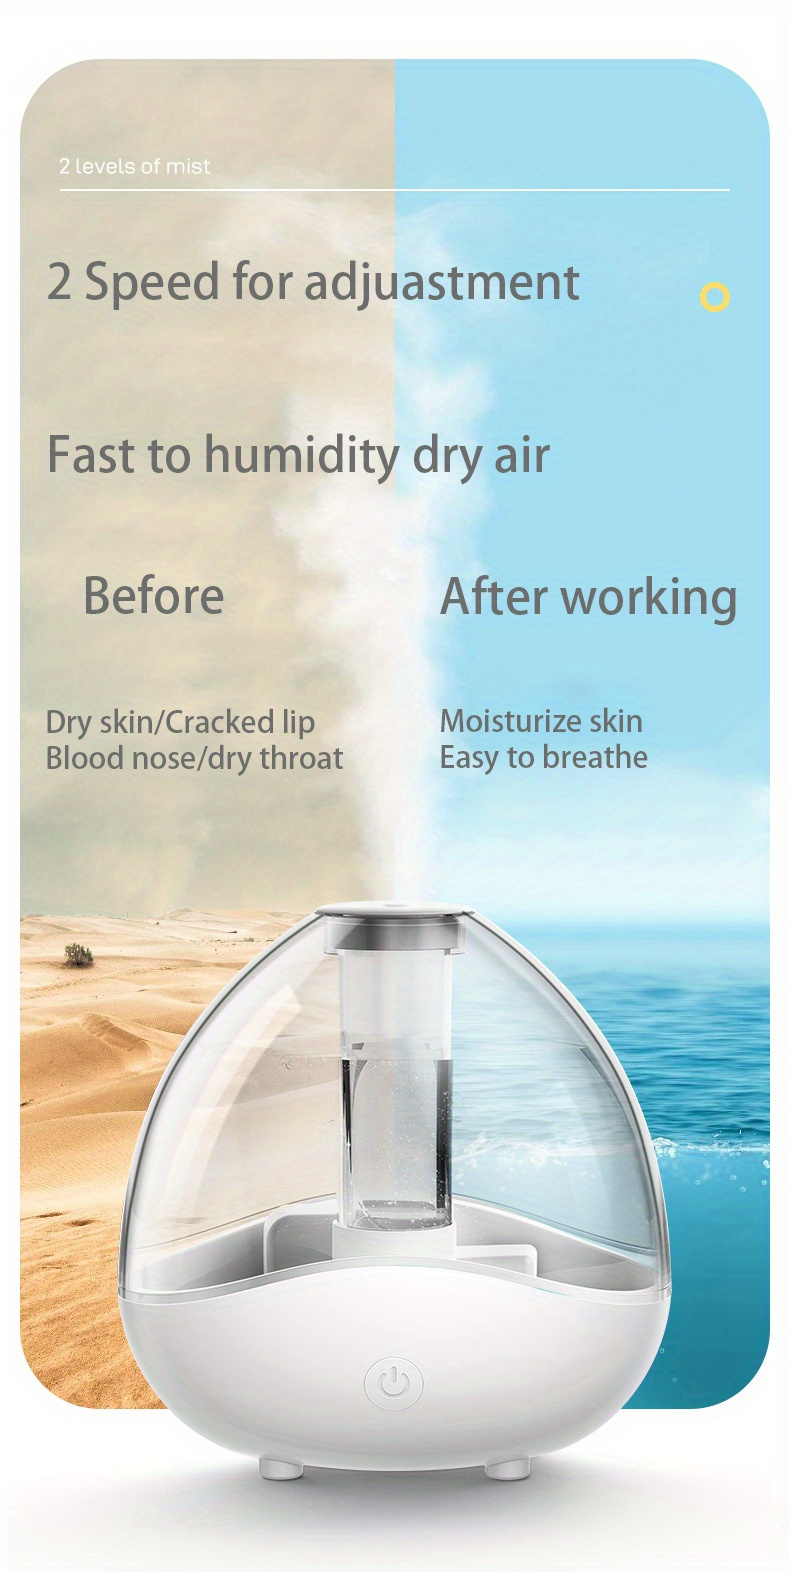 1 5l large capacity clear water tank humidifier 360 degree nozzle portable cool mist usb 7 colors glow in the dark ultrasonic h2o air humidifier aromather details 3